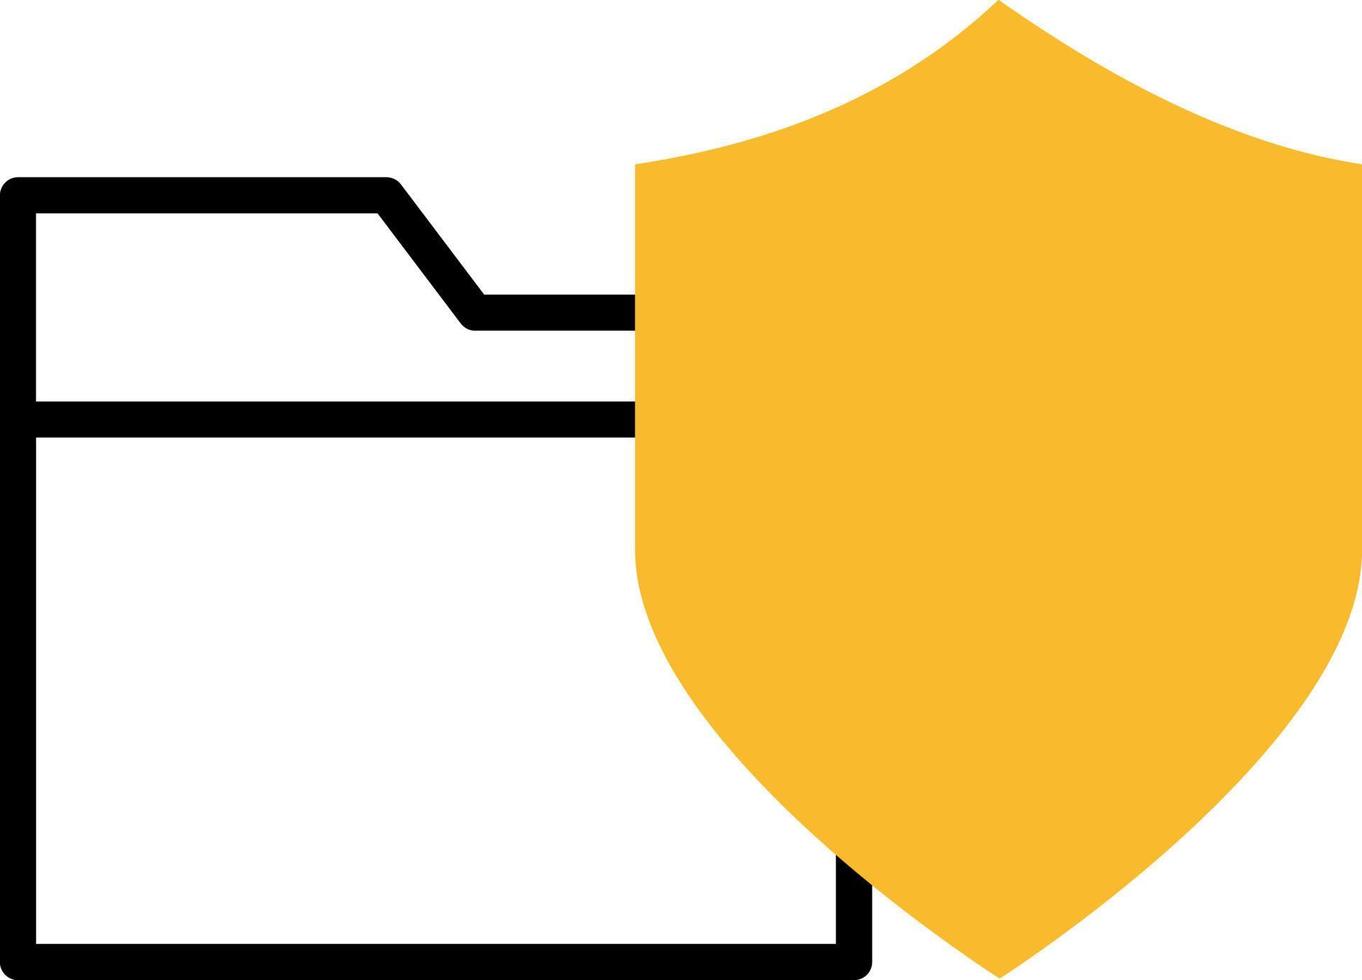 Network security folder, illustration, vector on a white background.